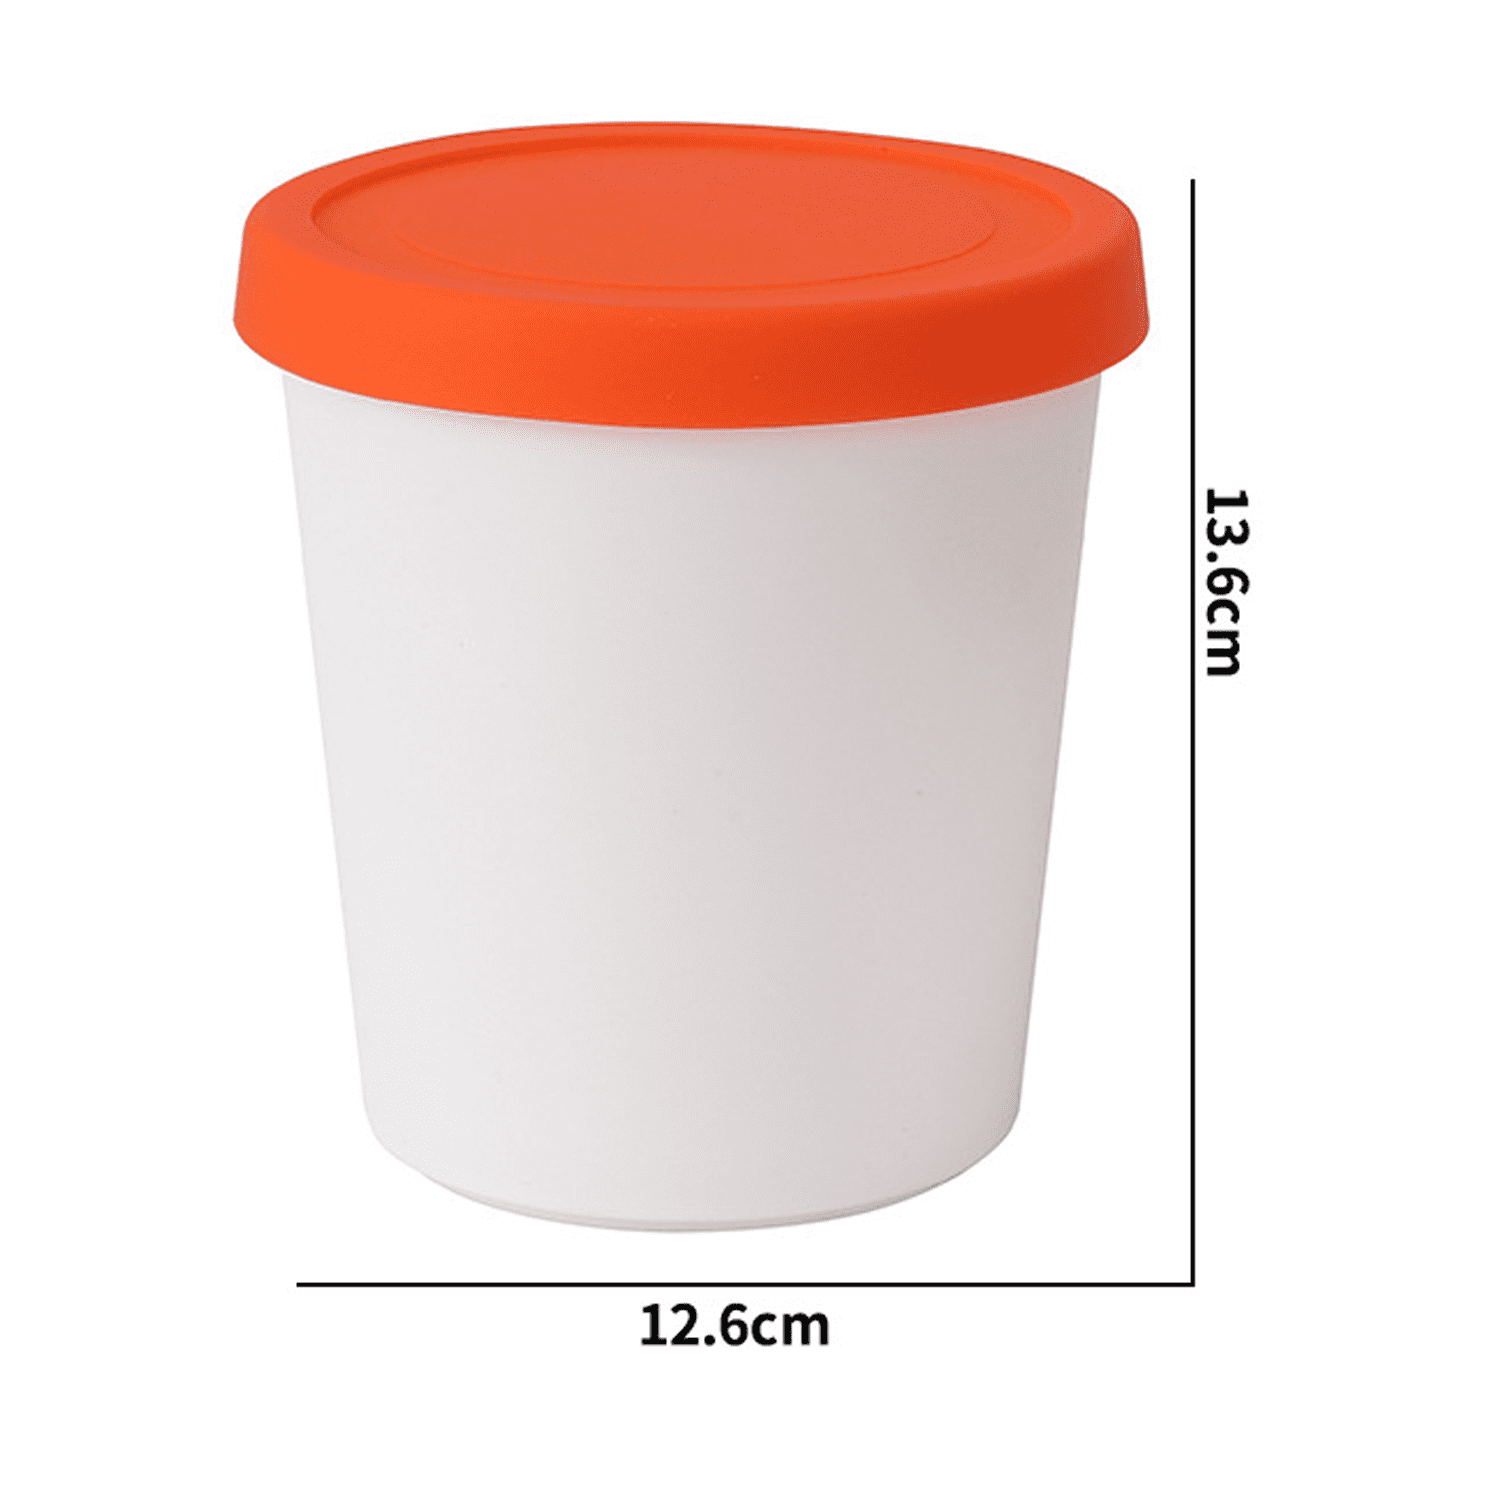  LOMILD Ice Cream Containers 4 Pack, Replacement for